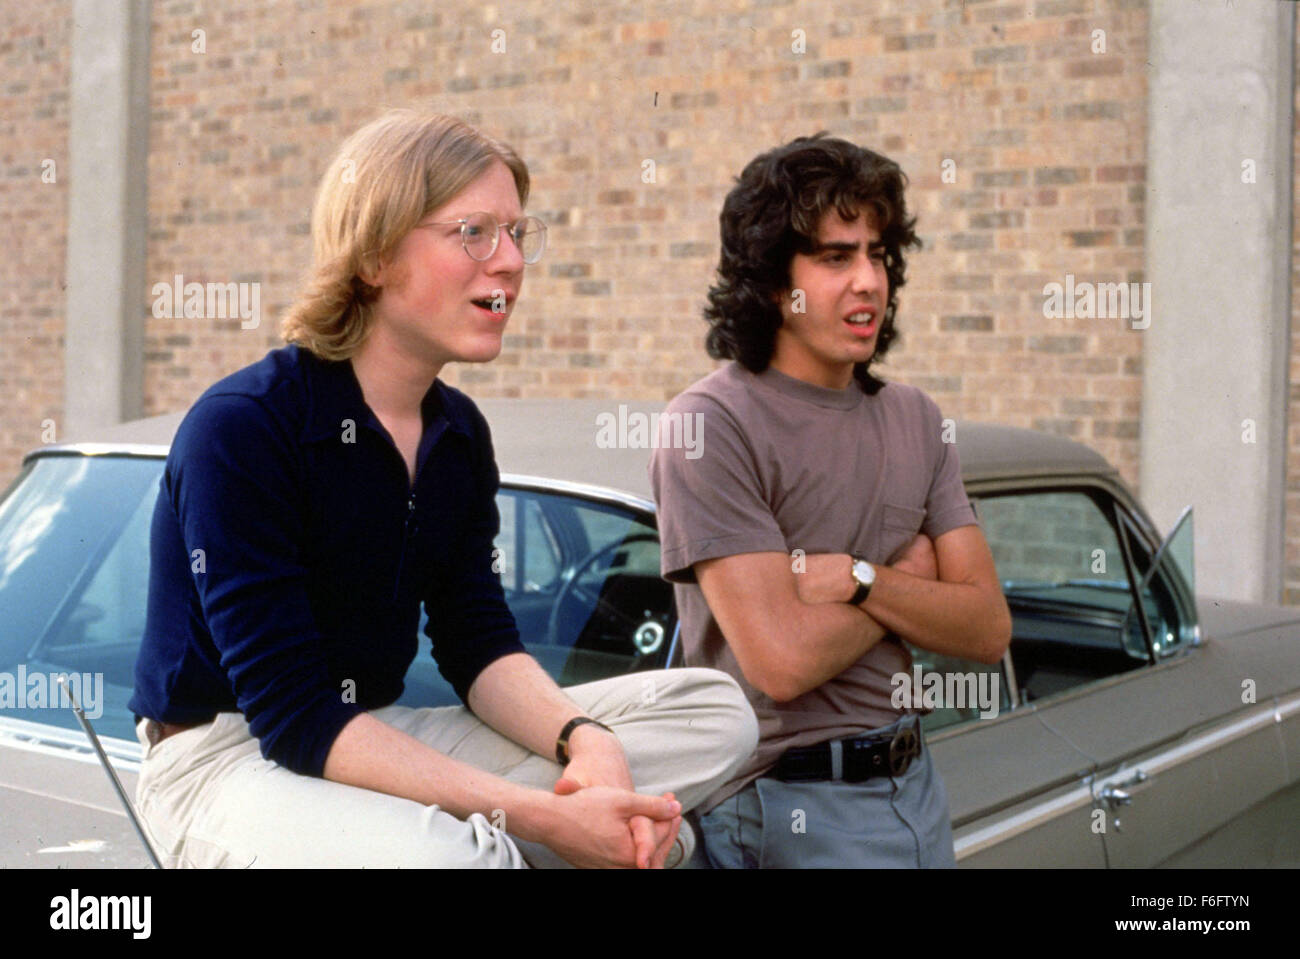 Sep 10, 1993; Austin, TX, USA; ANTHONY RAPP and ADAM GOLDBERG star as Tony Olson and Mike Newhouse in the comedy drama 'Dazed and Confused' directed by Richard Linklater. Stock Photo